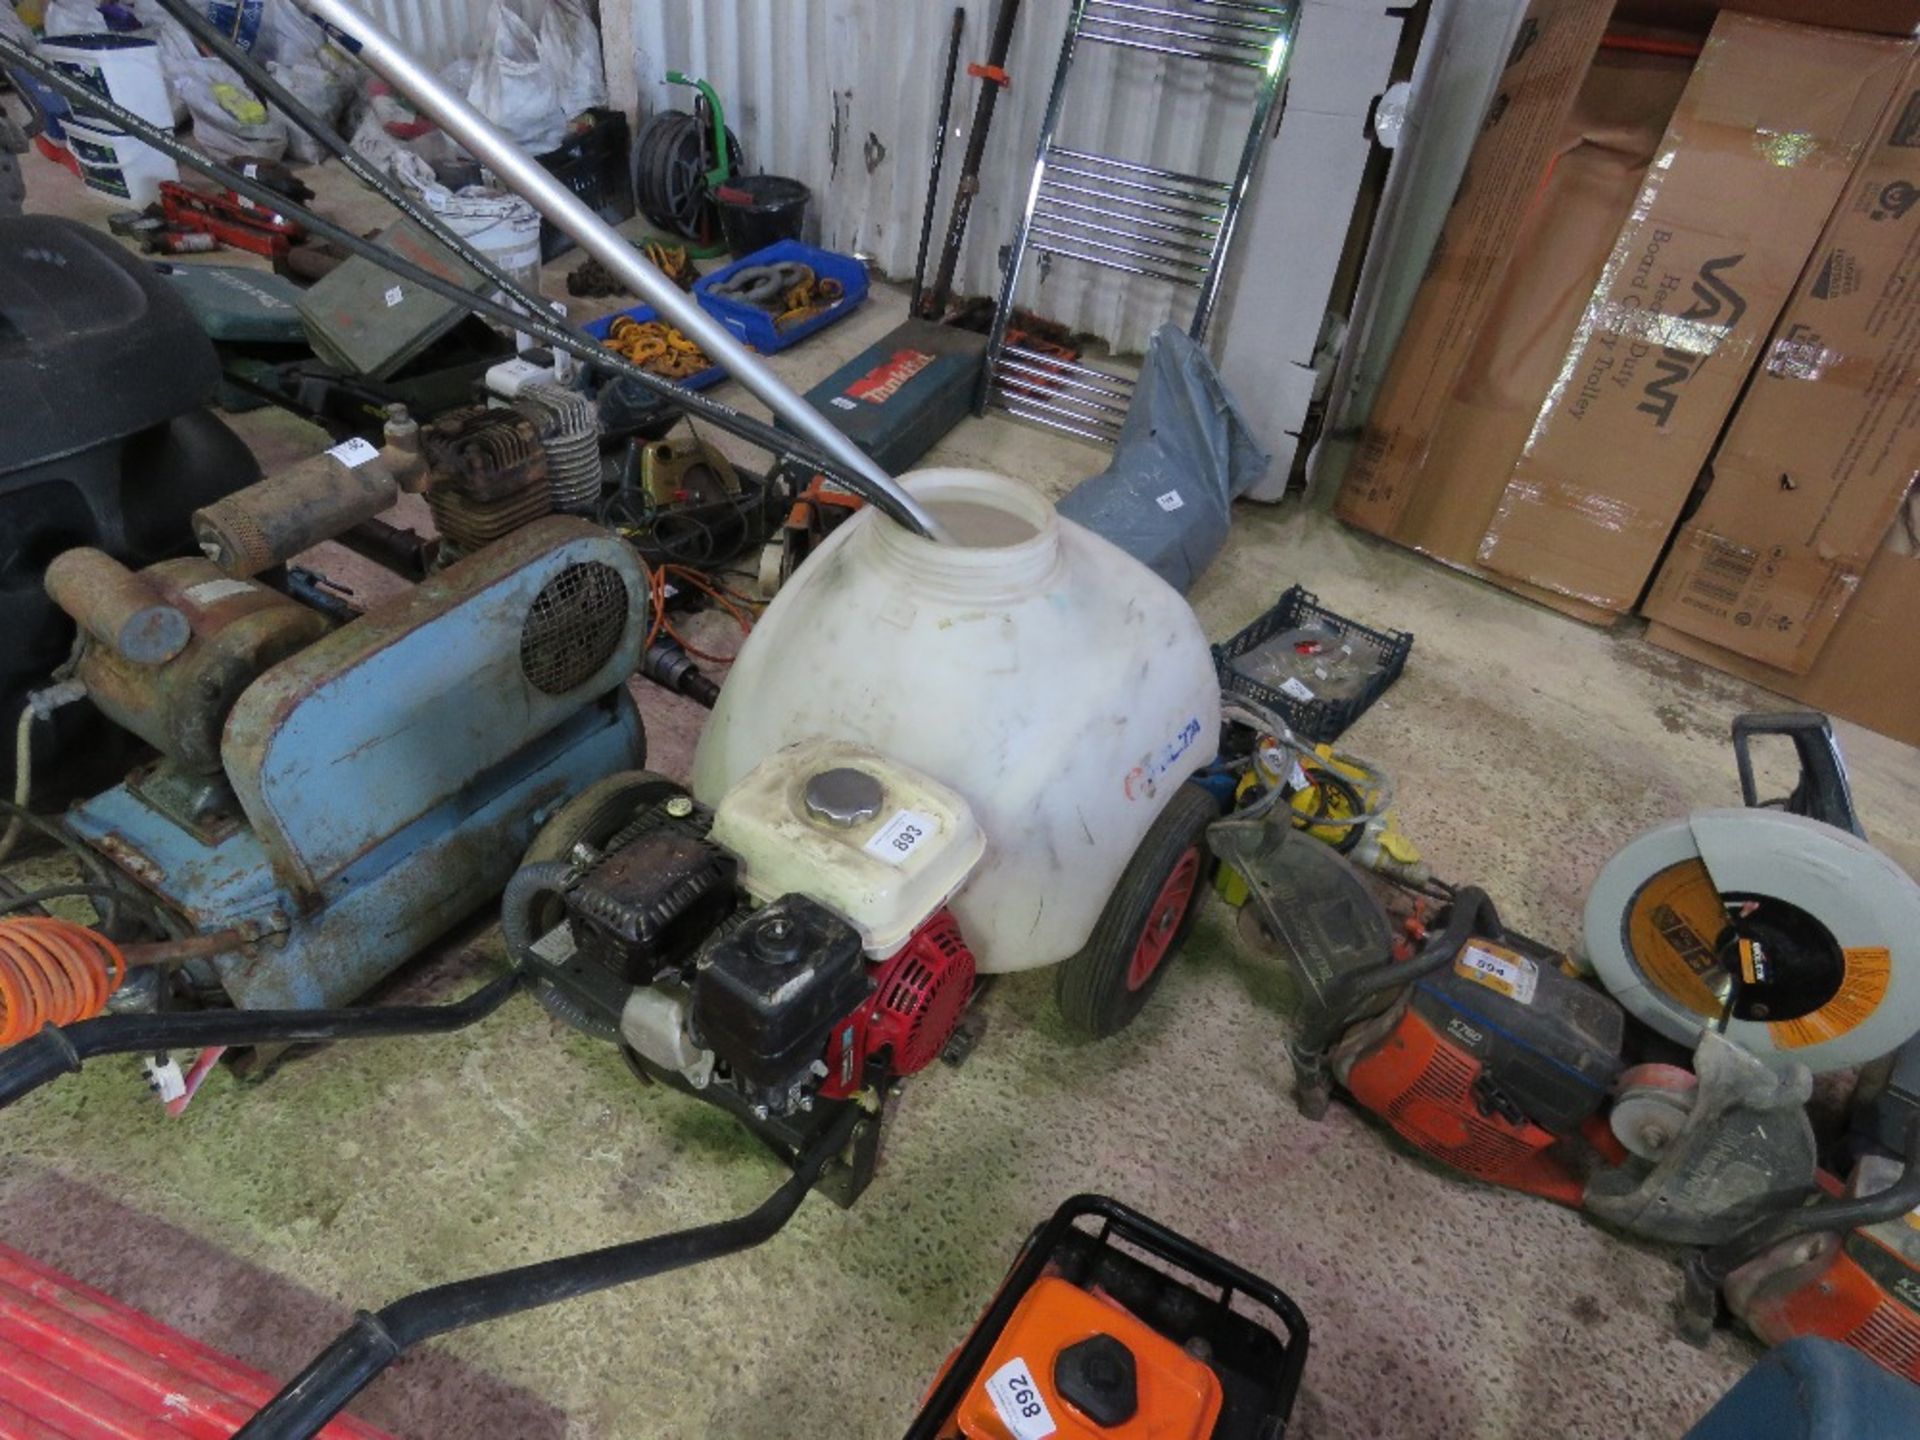 HILTA HONDA ENGINED PRESSURE WASHER BOWSER BARROW WITH EXTRA LONG LANCE. - Image 4 of 9